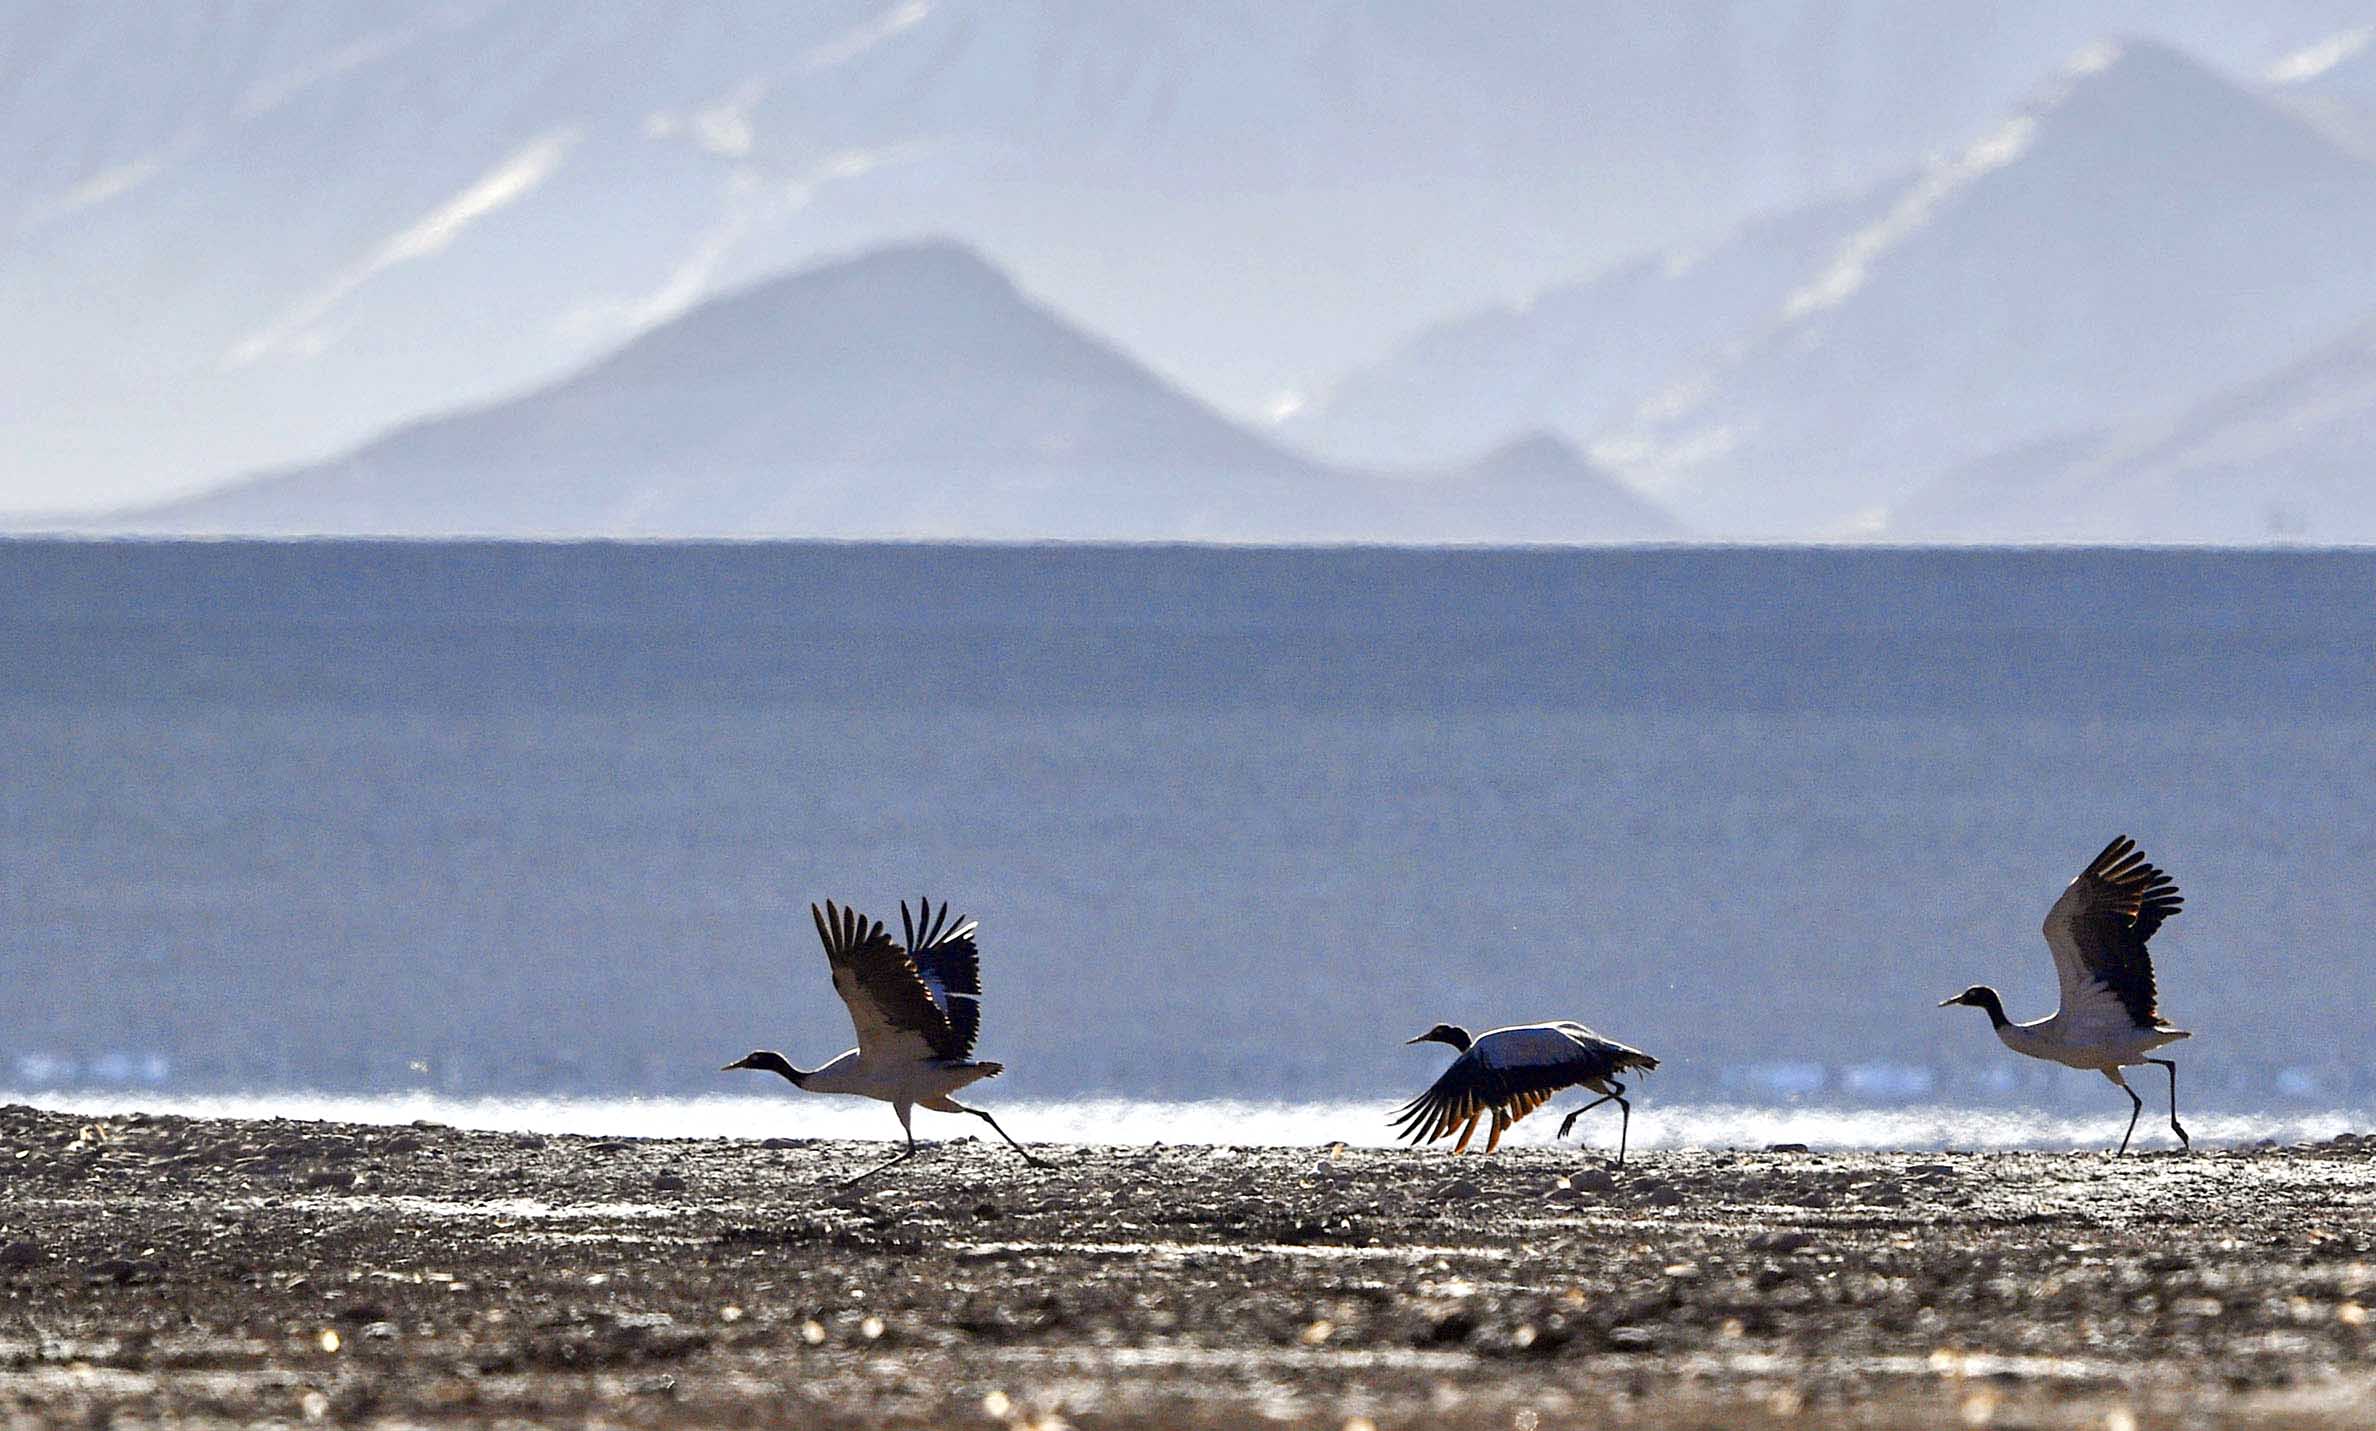 This photo taken on March 1, 2023 shows black-necked cranes in Lhunzhub County of Lhasa, southwest China's Tibet Autonomous Region.  Listed as a bird species under national first-class protection, black-necked cranes mainly inhabit plateaus, meadows, marshes, reed swamps, lakeside meadow swamps and river valley swamps at altitudes of 2,500-5,000 meters. Lhunzhub County in Tibet is one of the major wintering habitat of black-necked cranes.  The population of black-necked cranes in Tibet has surpassed 10,000, according to a report released last year by the regional department of ecology and environment. (Xinhua/Zhang Rufeng)